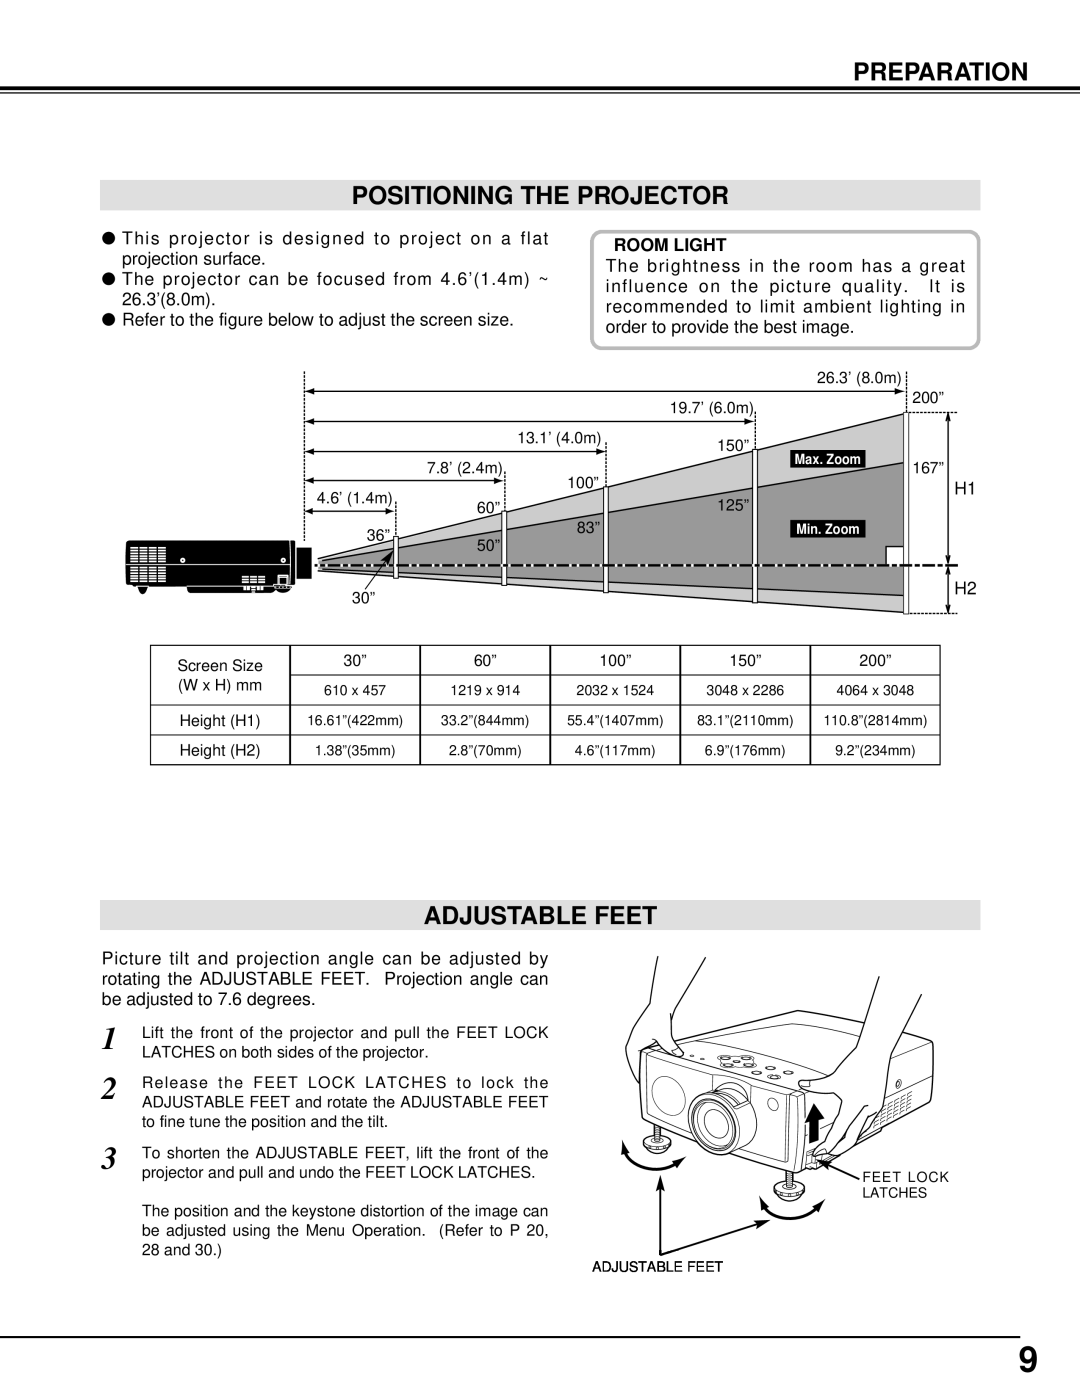 Canon 5100 owner manual Preparation Positioning The Projector, Adjustable Feet, Room Light 